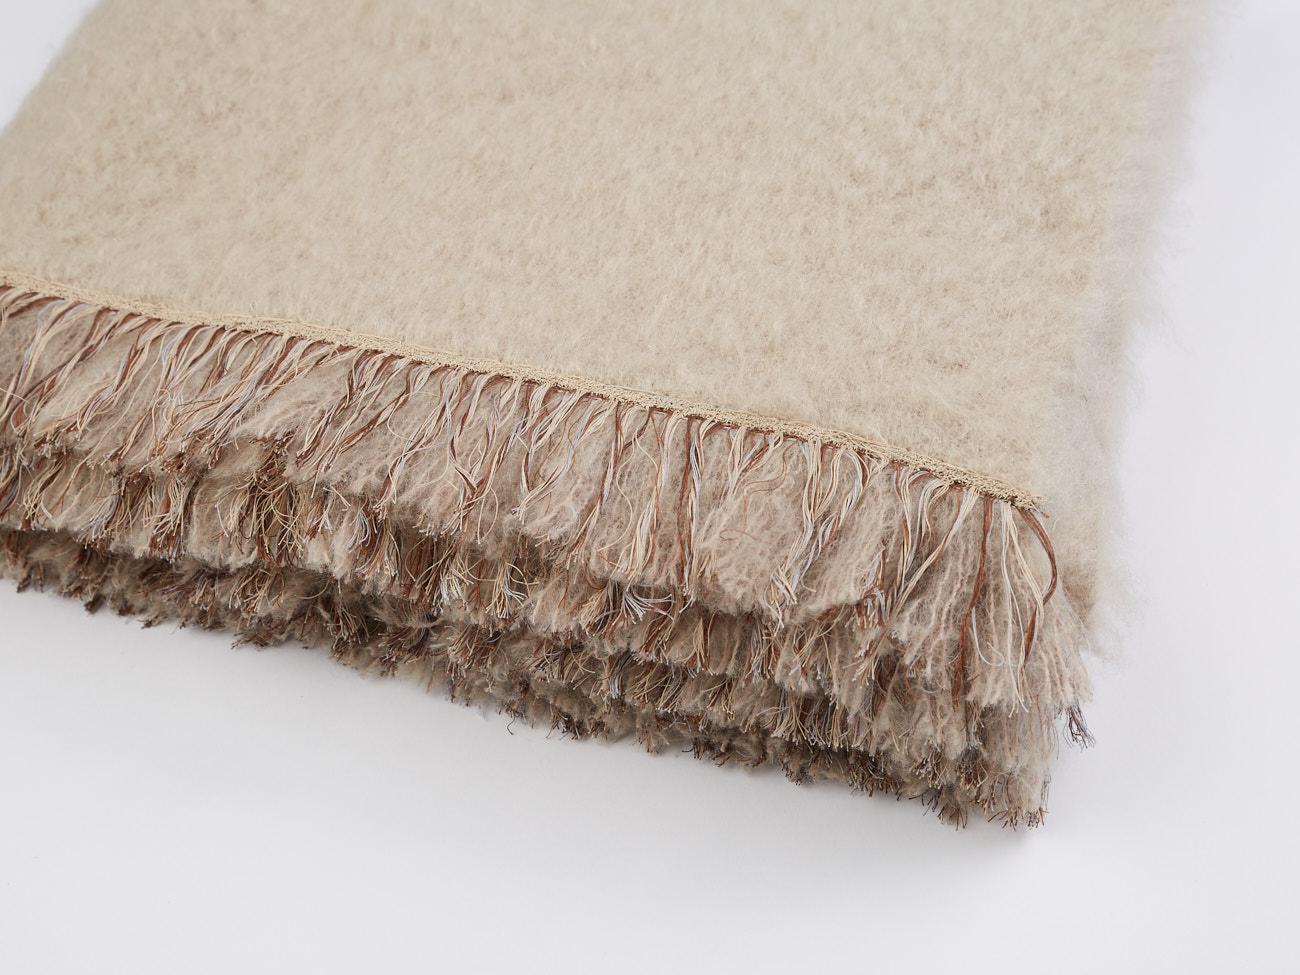 Brewster, a chique beige throw blanket made of the finest New Zealand mohair. Characterized with a hand embroidered fringe border completely embroidered by hand.
 
Based in the Netherlands and India's Uttar Pradesh, Jupe by Jackie is an